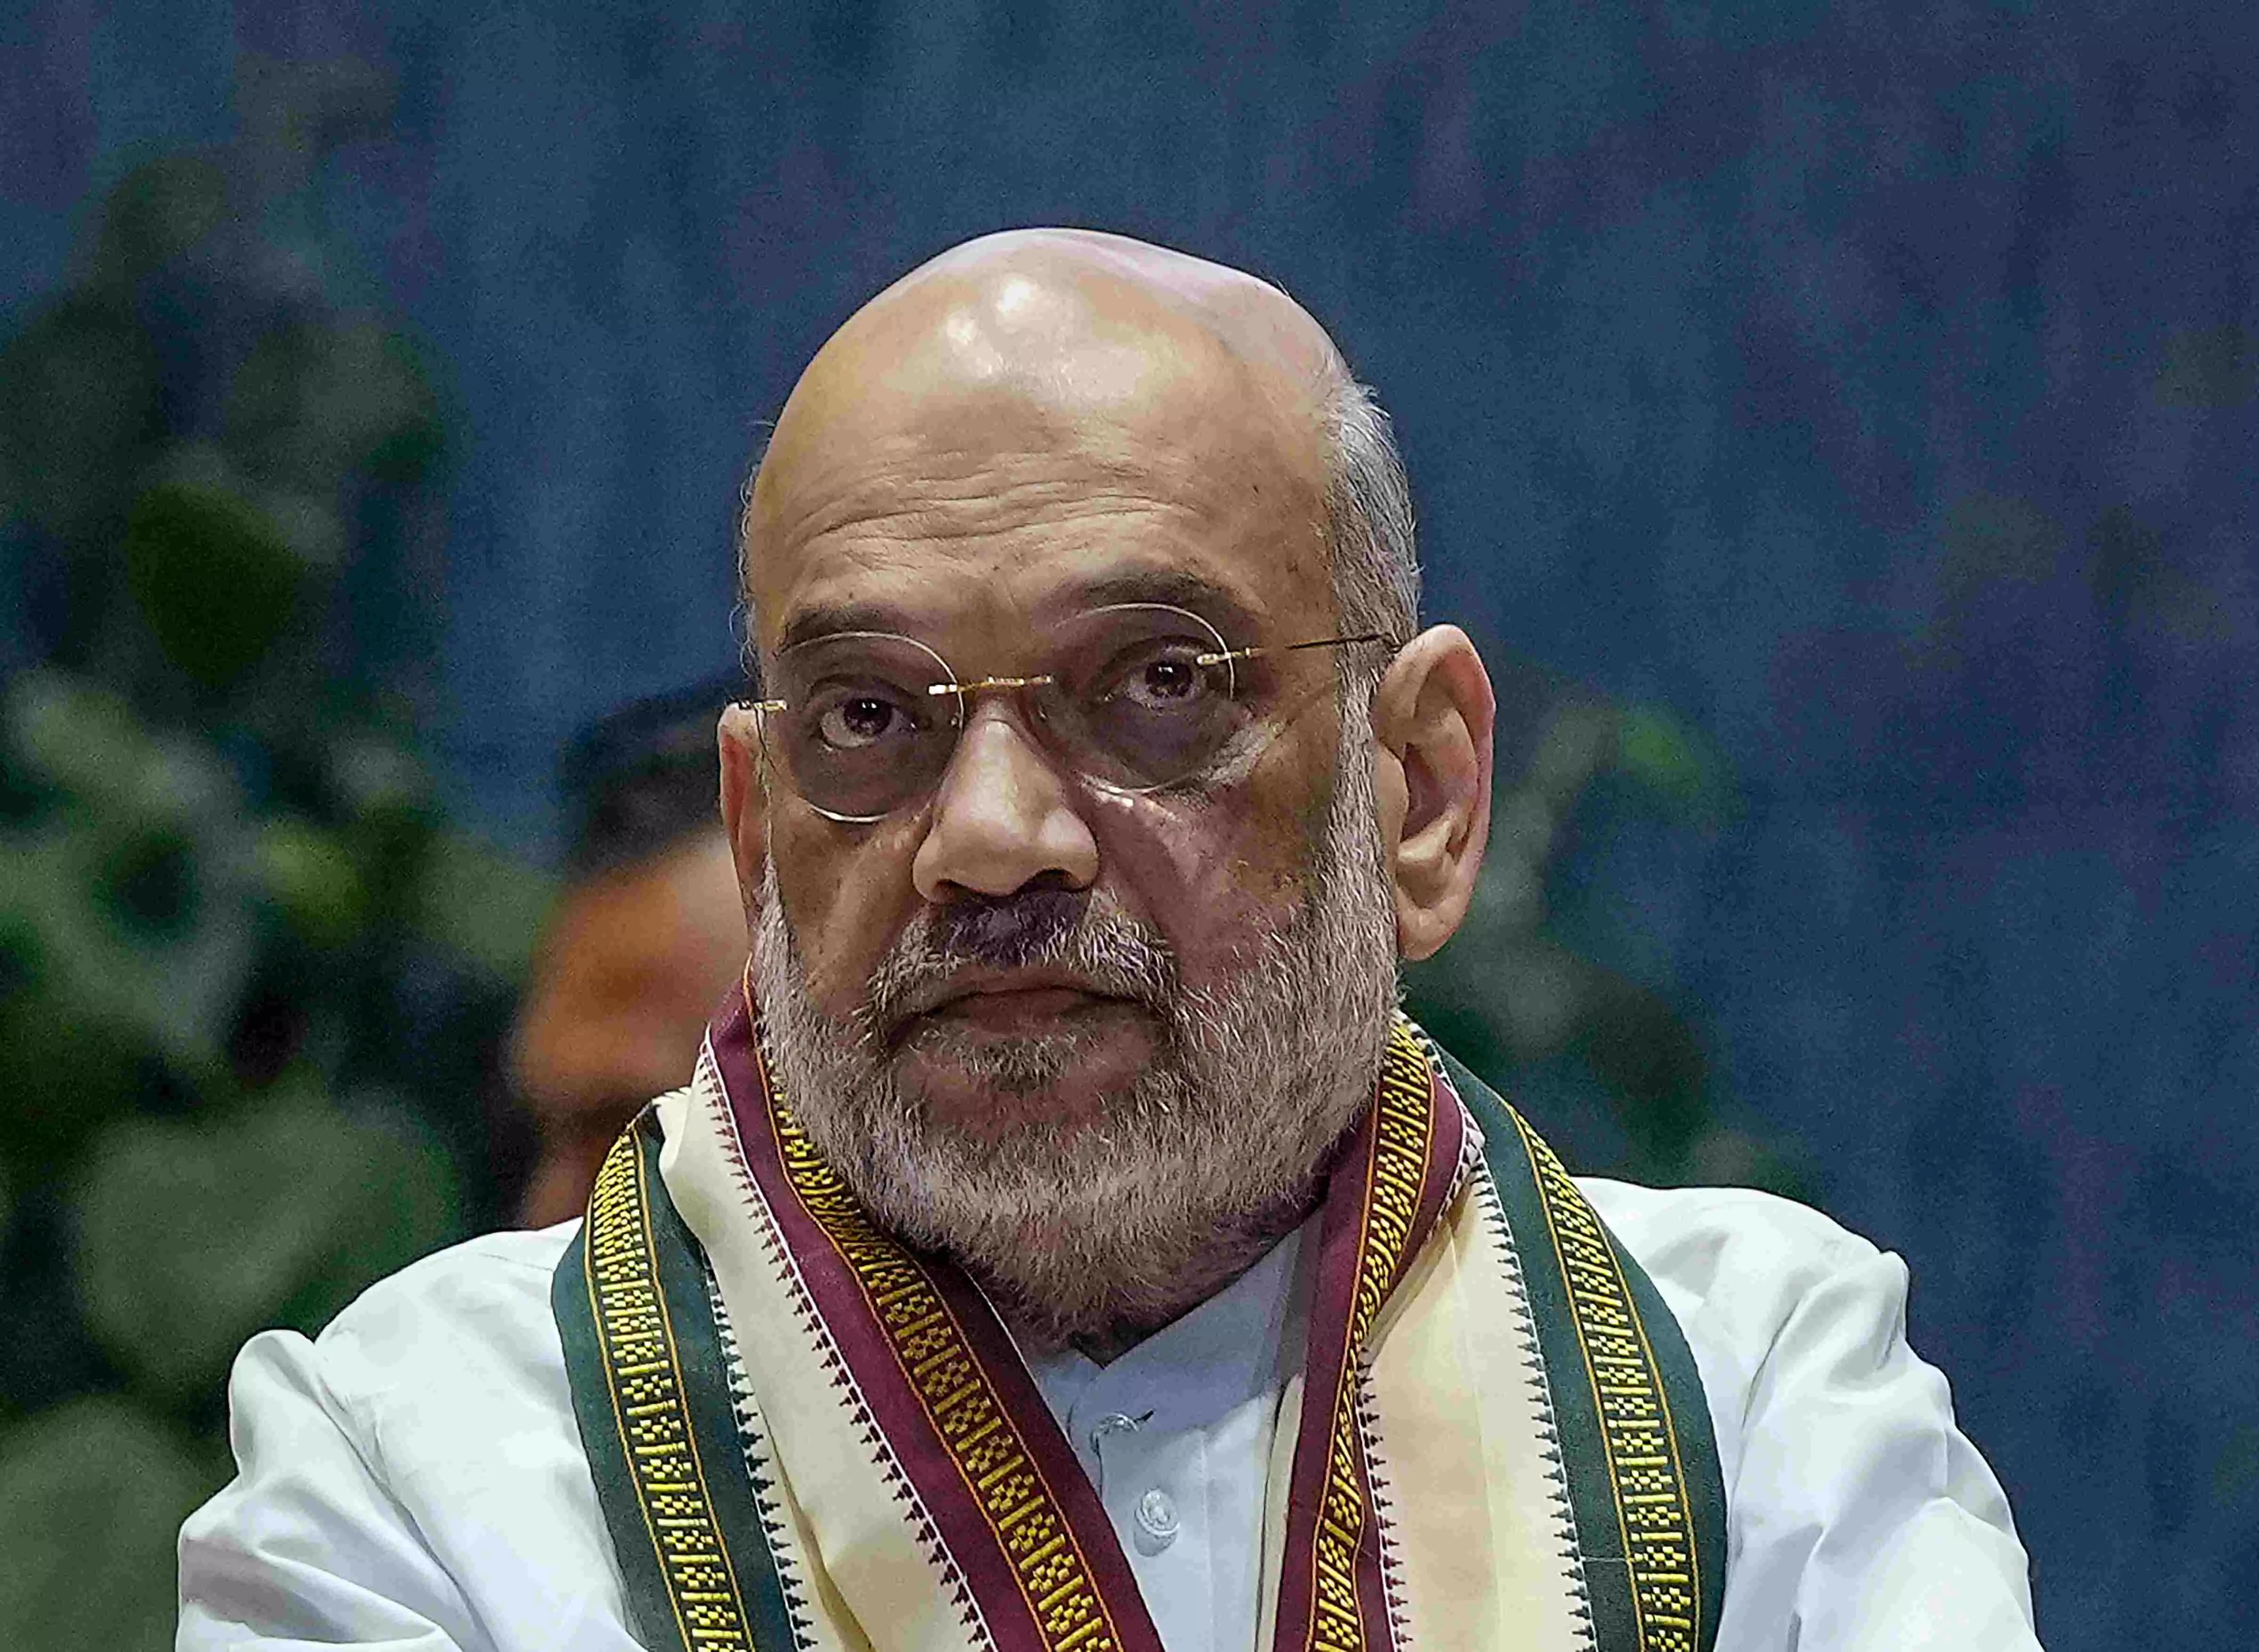 Voting for BJP means supporting patriots who wants Ram Rajya in country: Shah